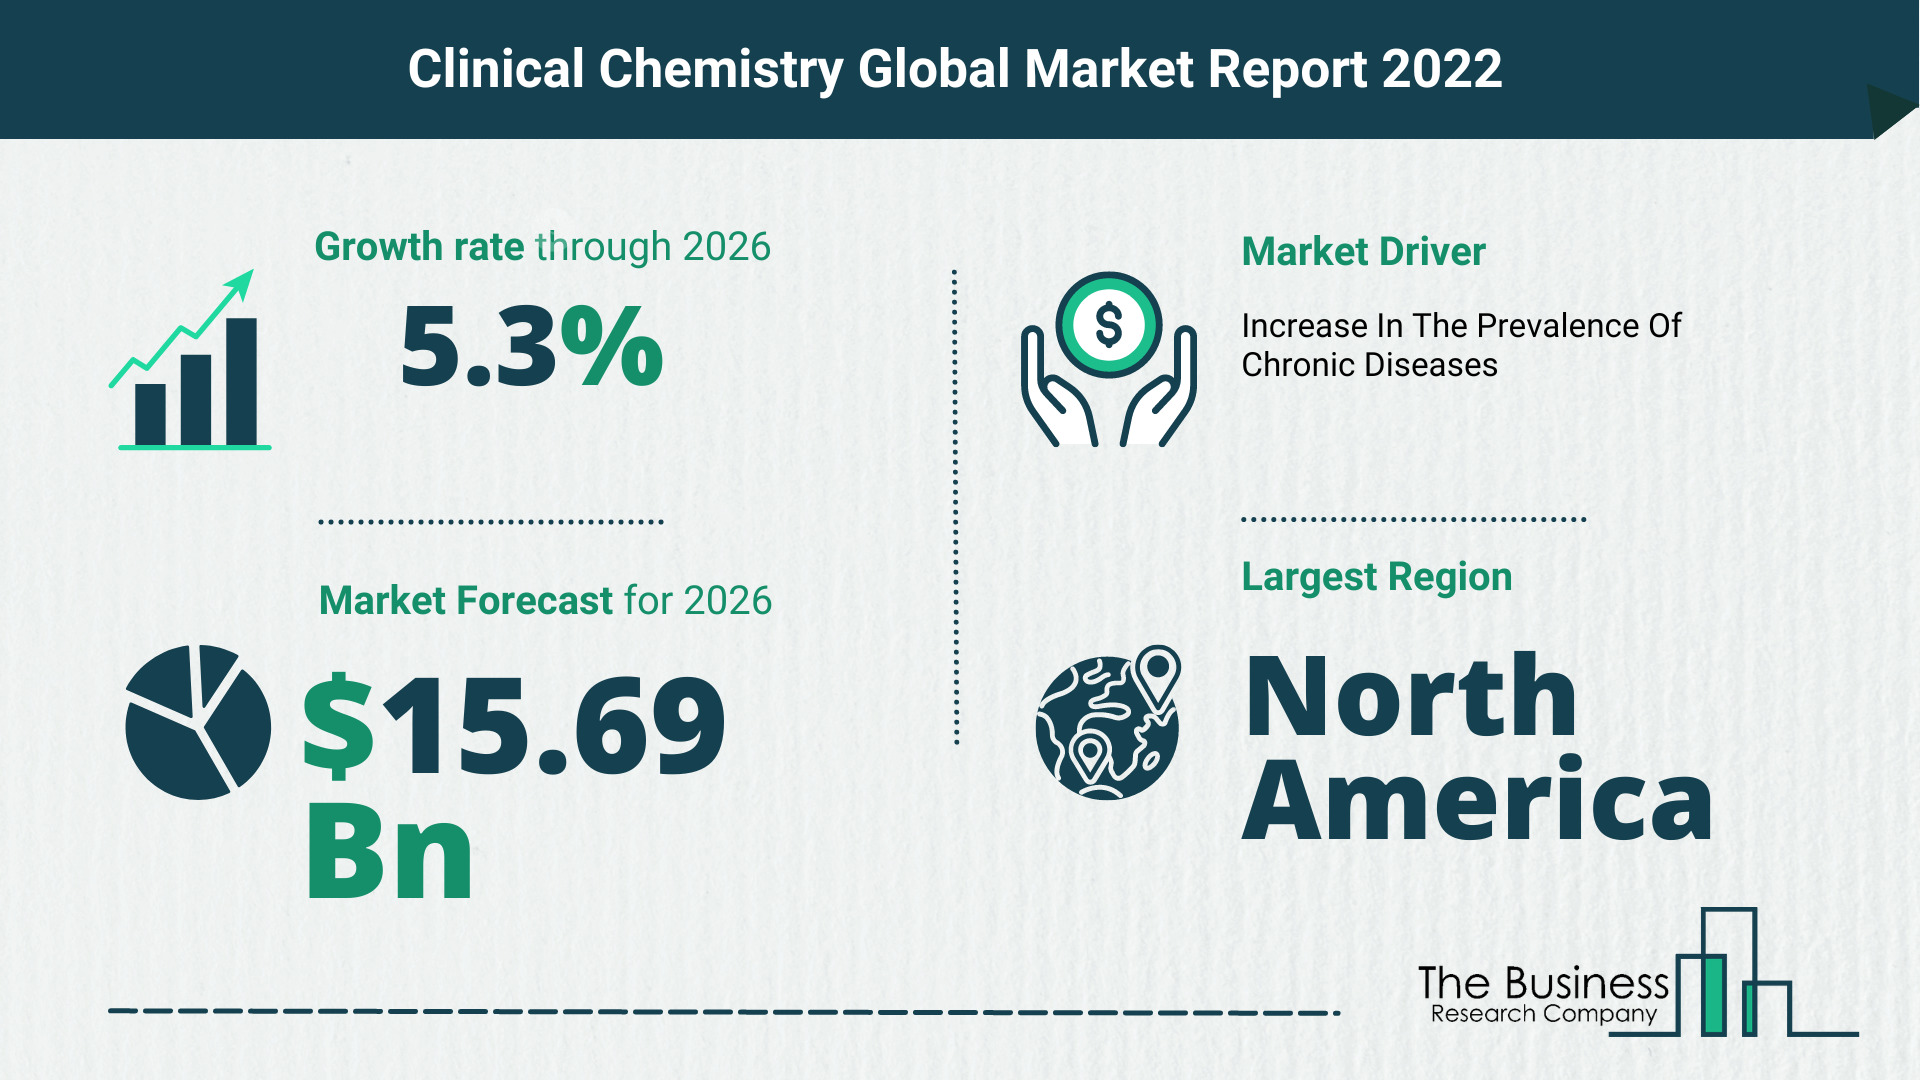 Global Clinical Chemistry Market 2022 – Market Opportunities And Strategies